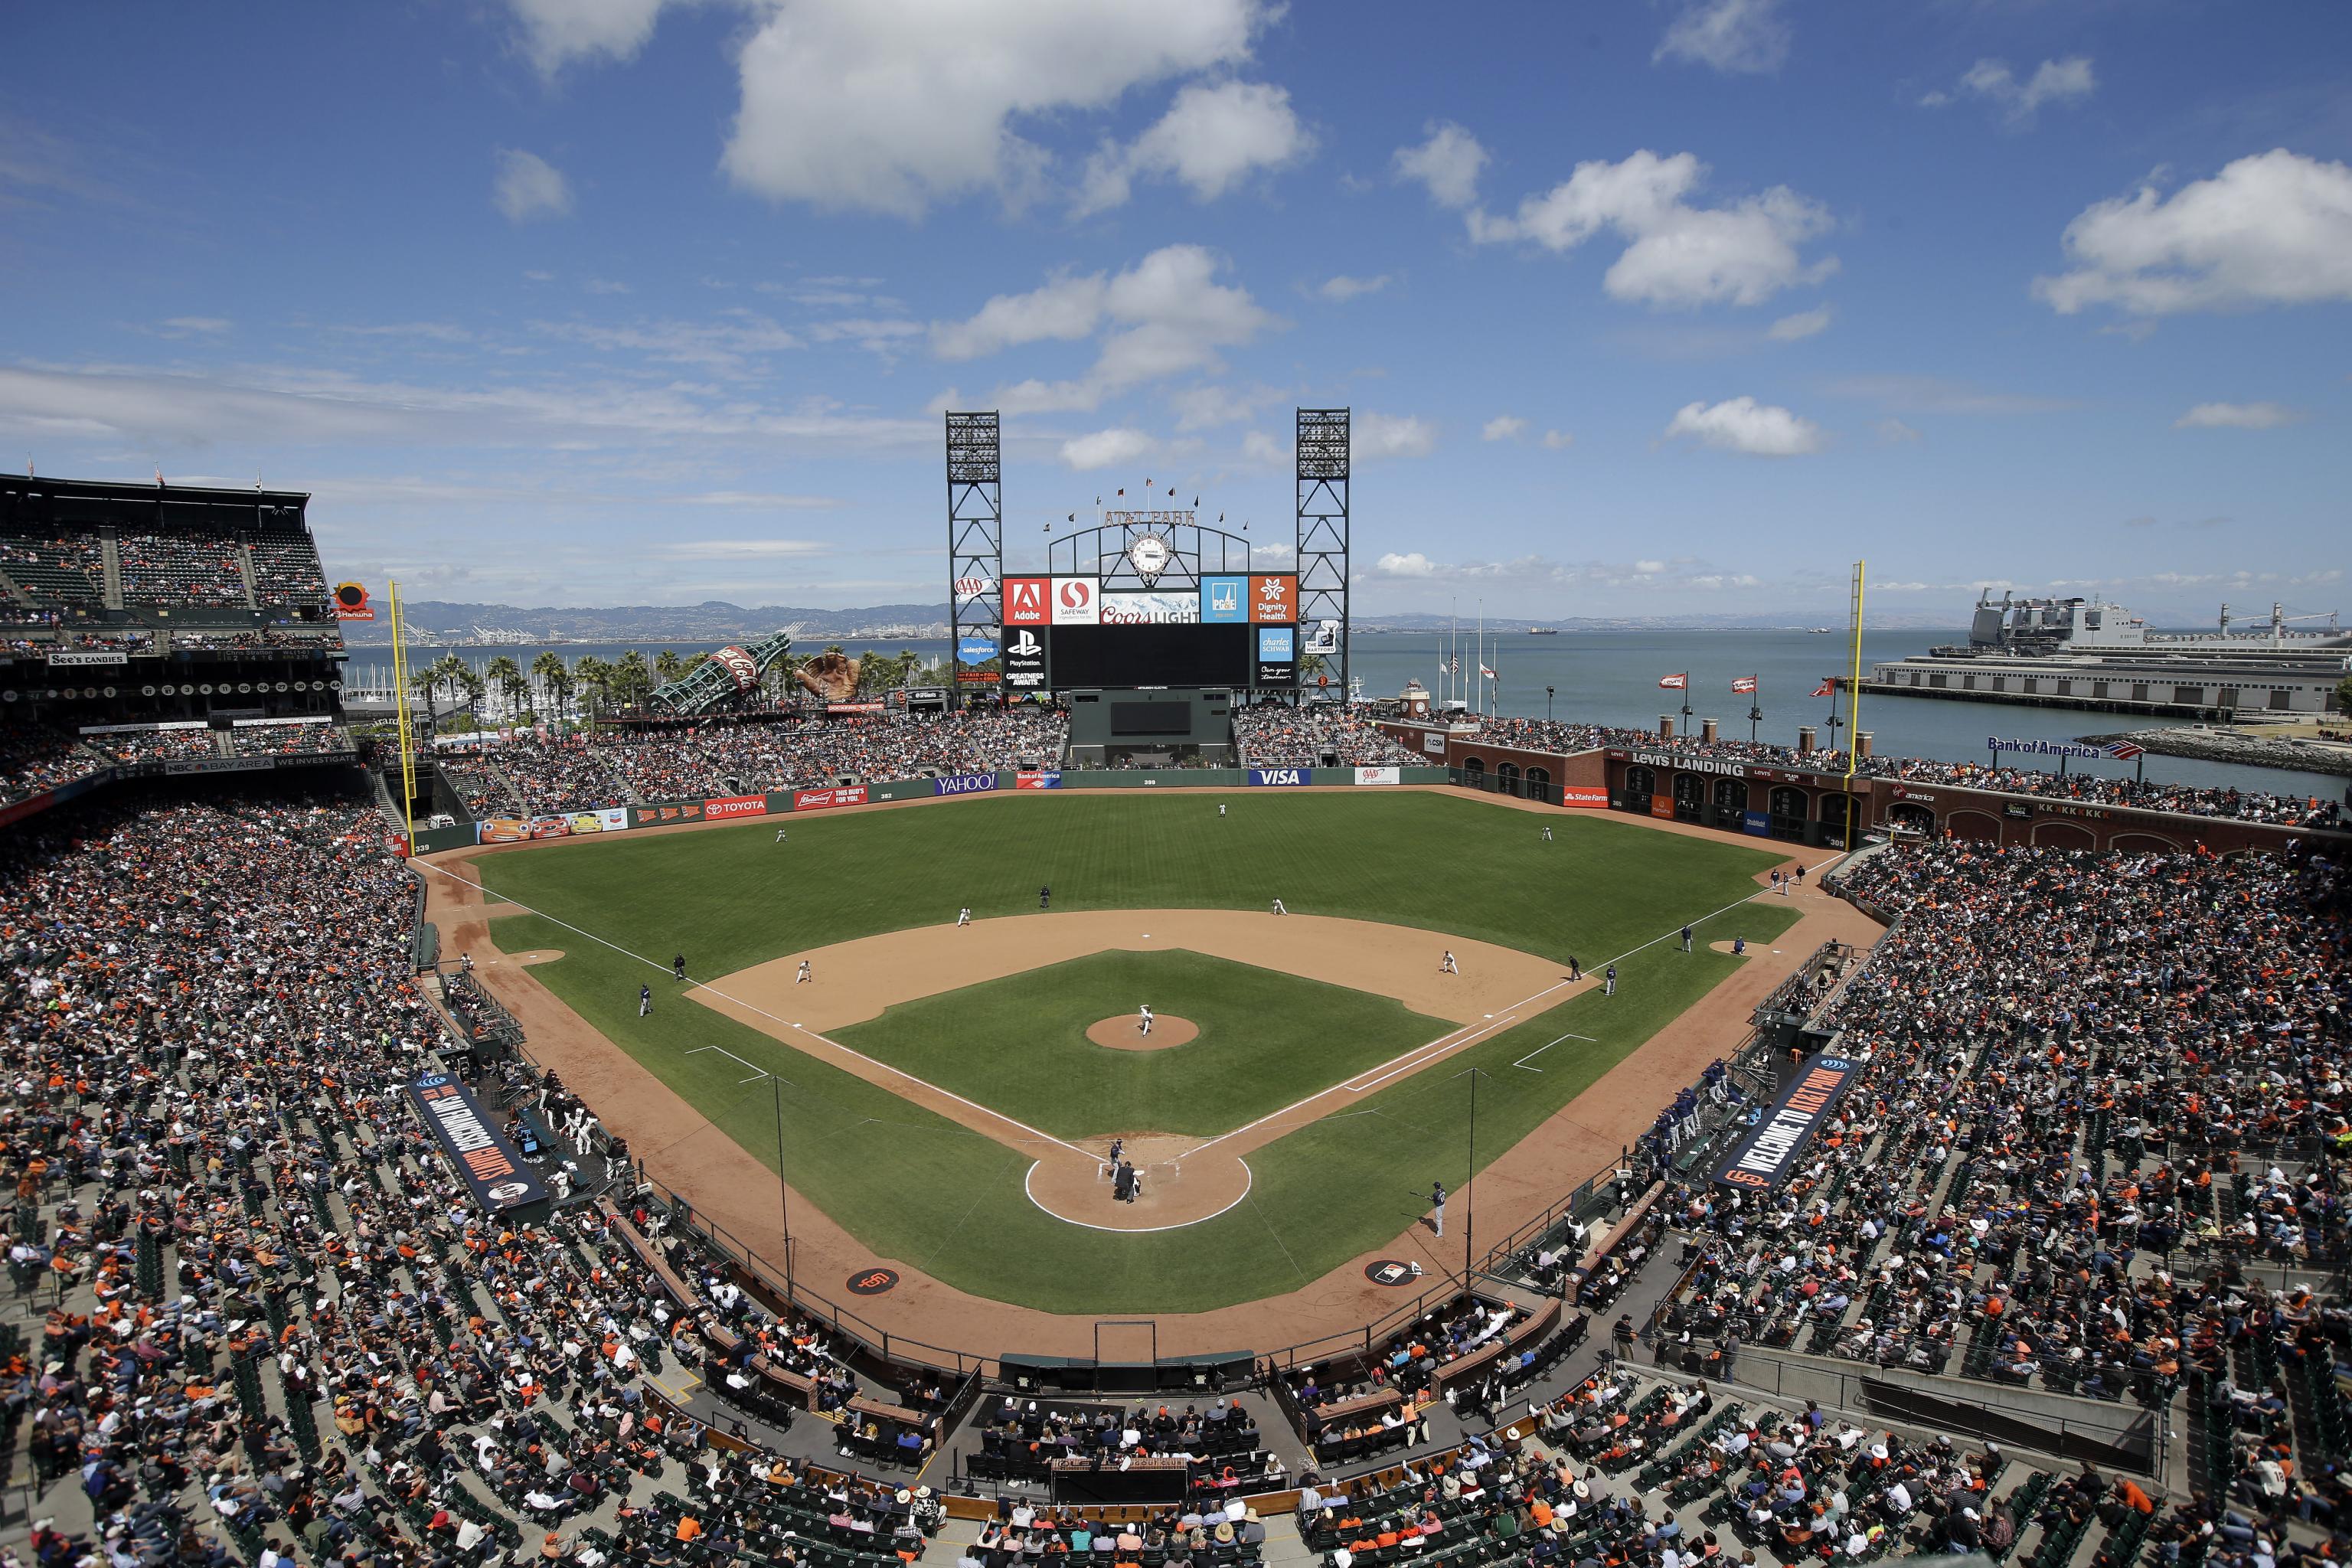 MPR: In San Francisco, the Giants went private for their stadium